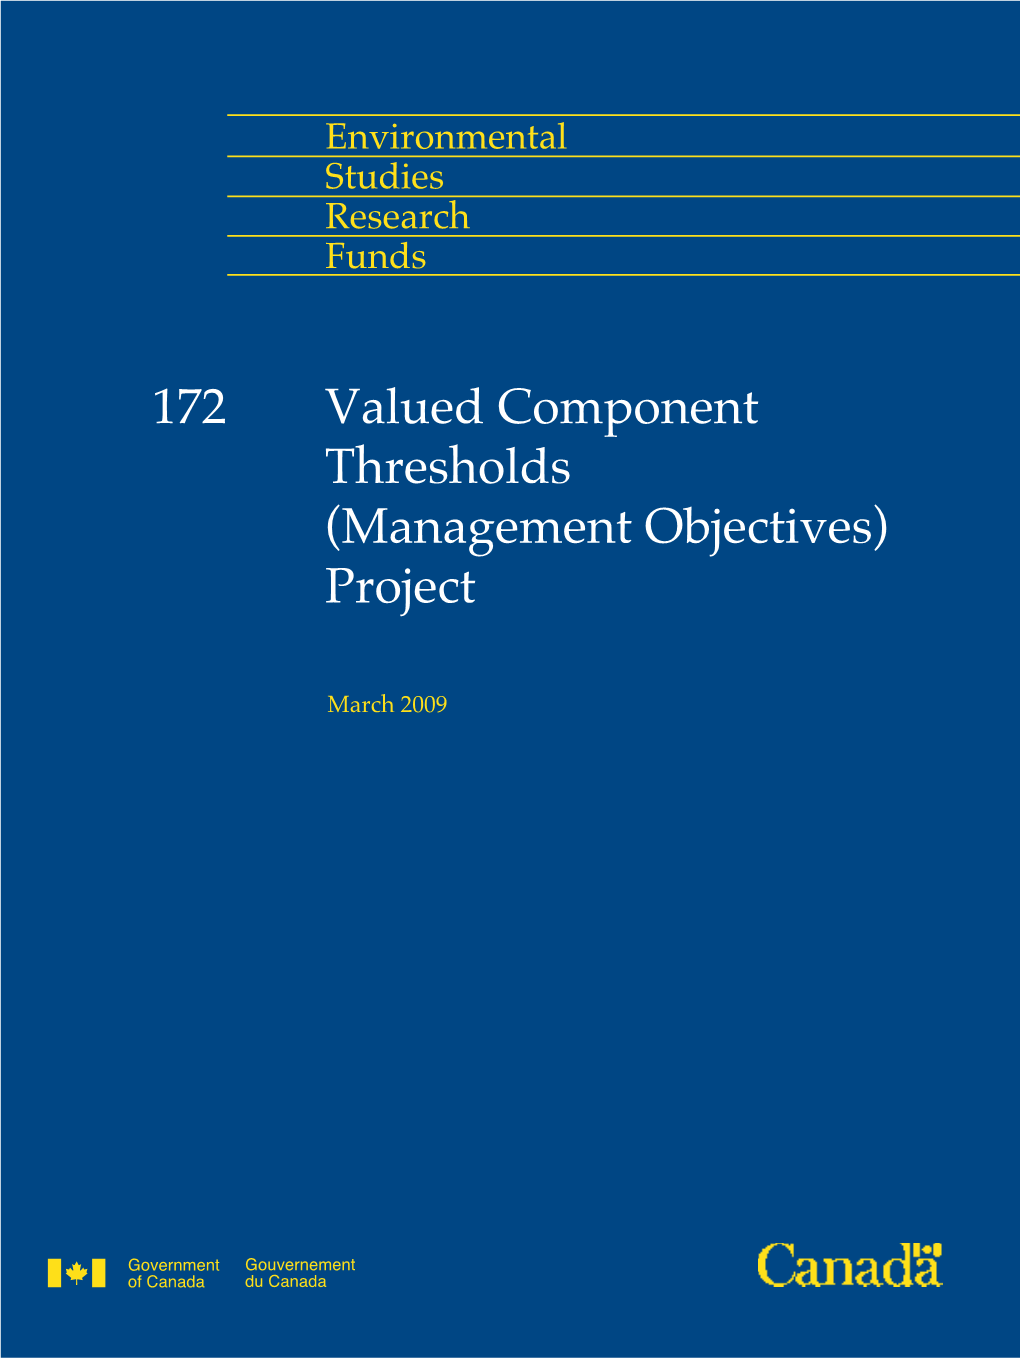 Valued Component Thresholds (Management Objectives) Project